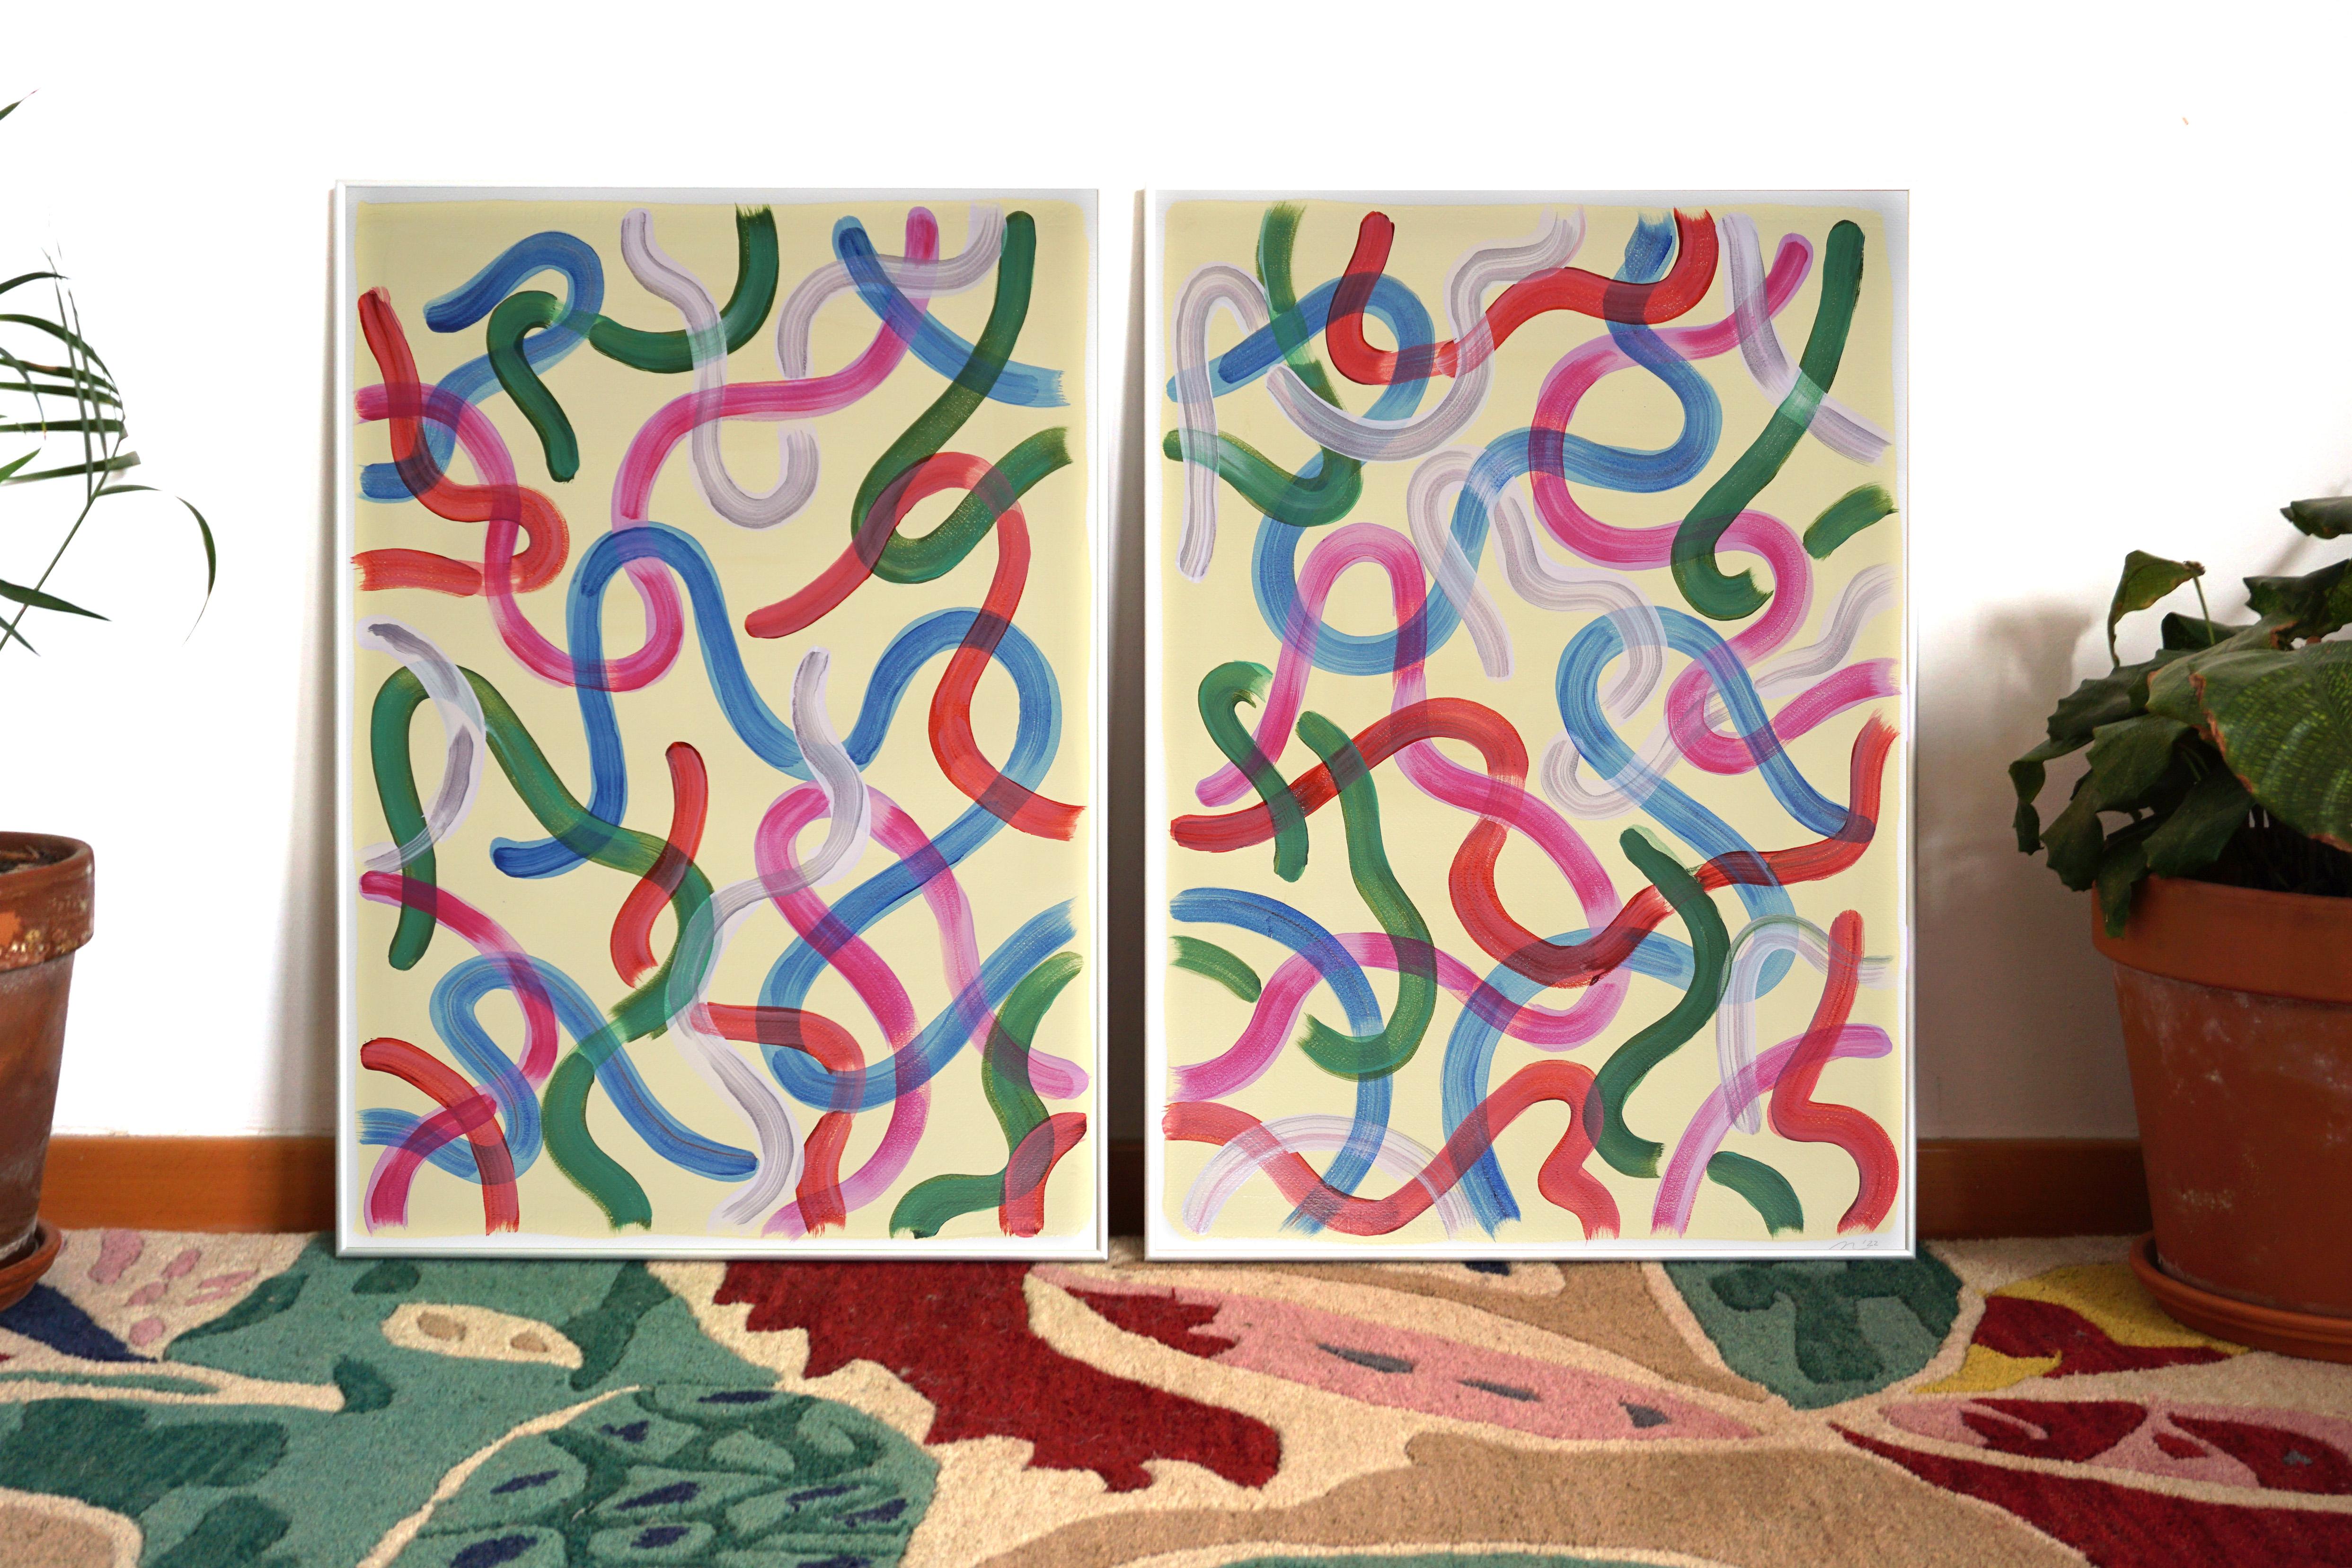 Vivid Gestures on Vanilla, Urban Brush Strokes in Red, Pink and Green, Diptych For Sale 1